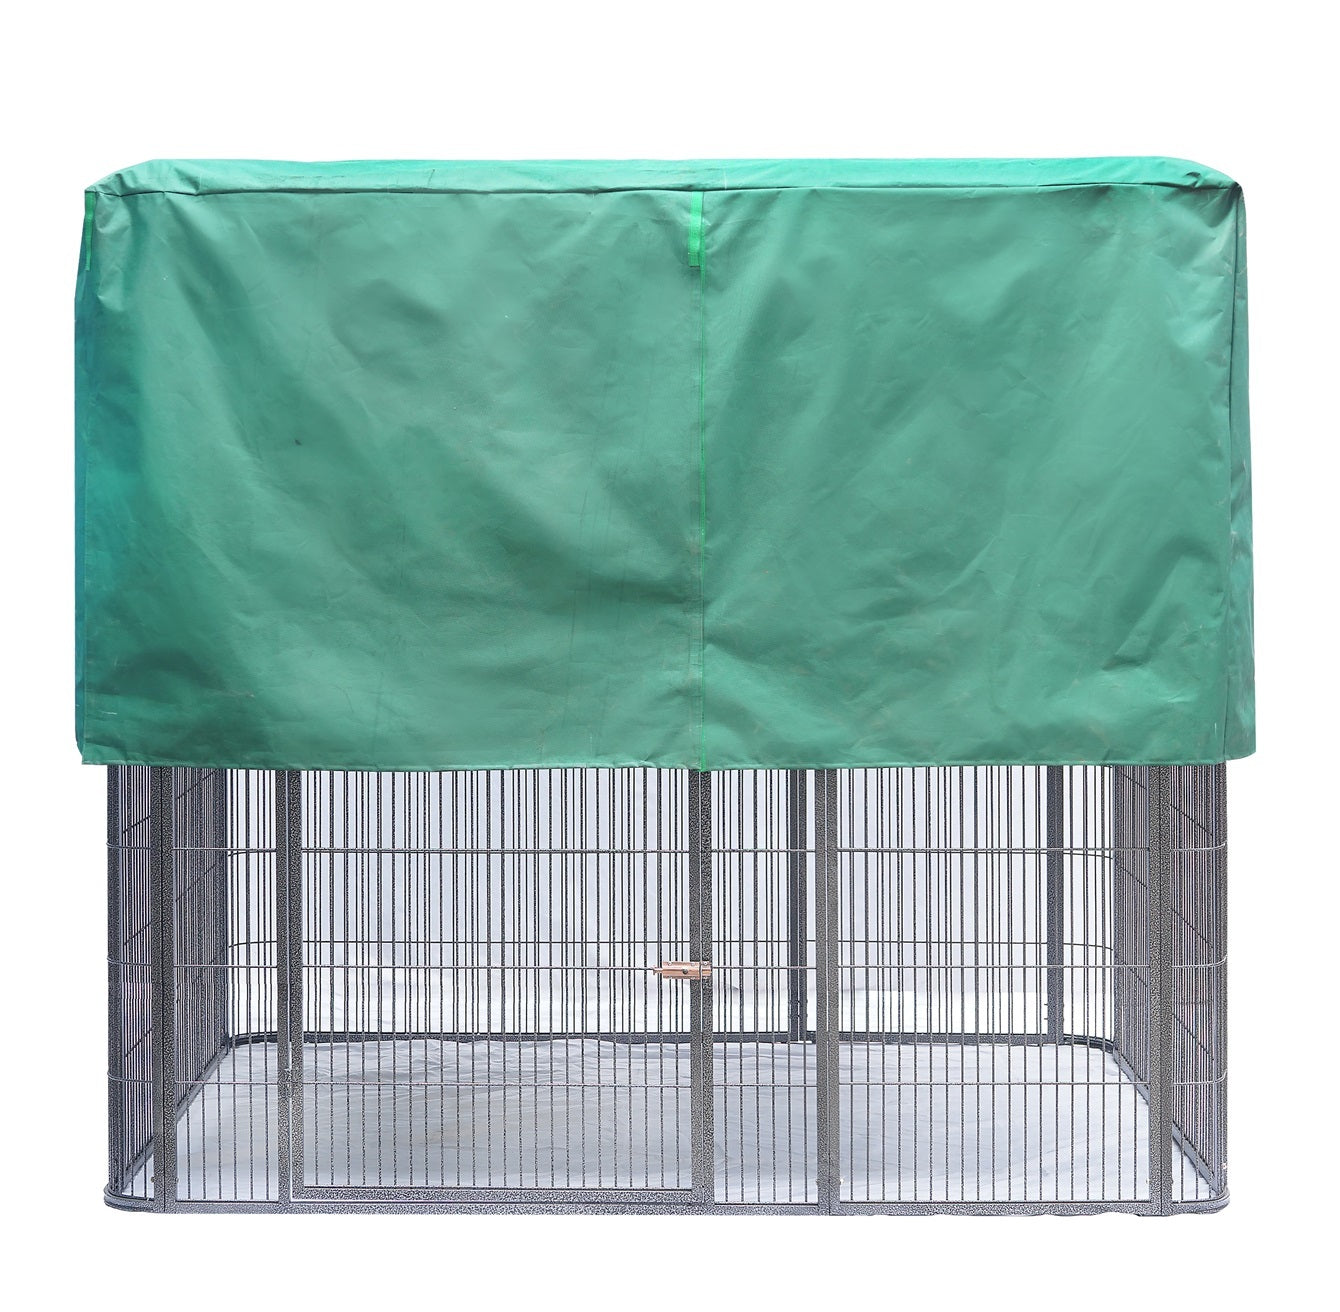 XXXXL Walk-in Bird Cat Dog Cage Pet Parrot Aviary  Perch 219x158x203cm With Green Cover